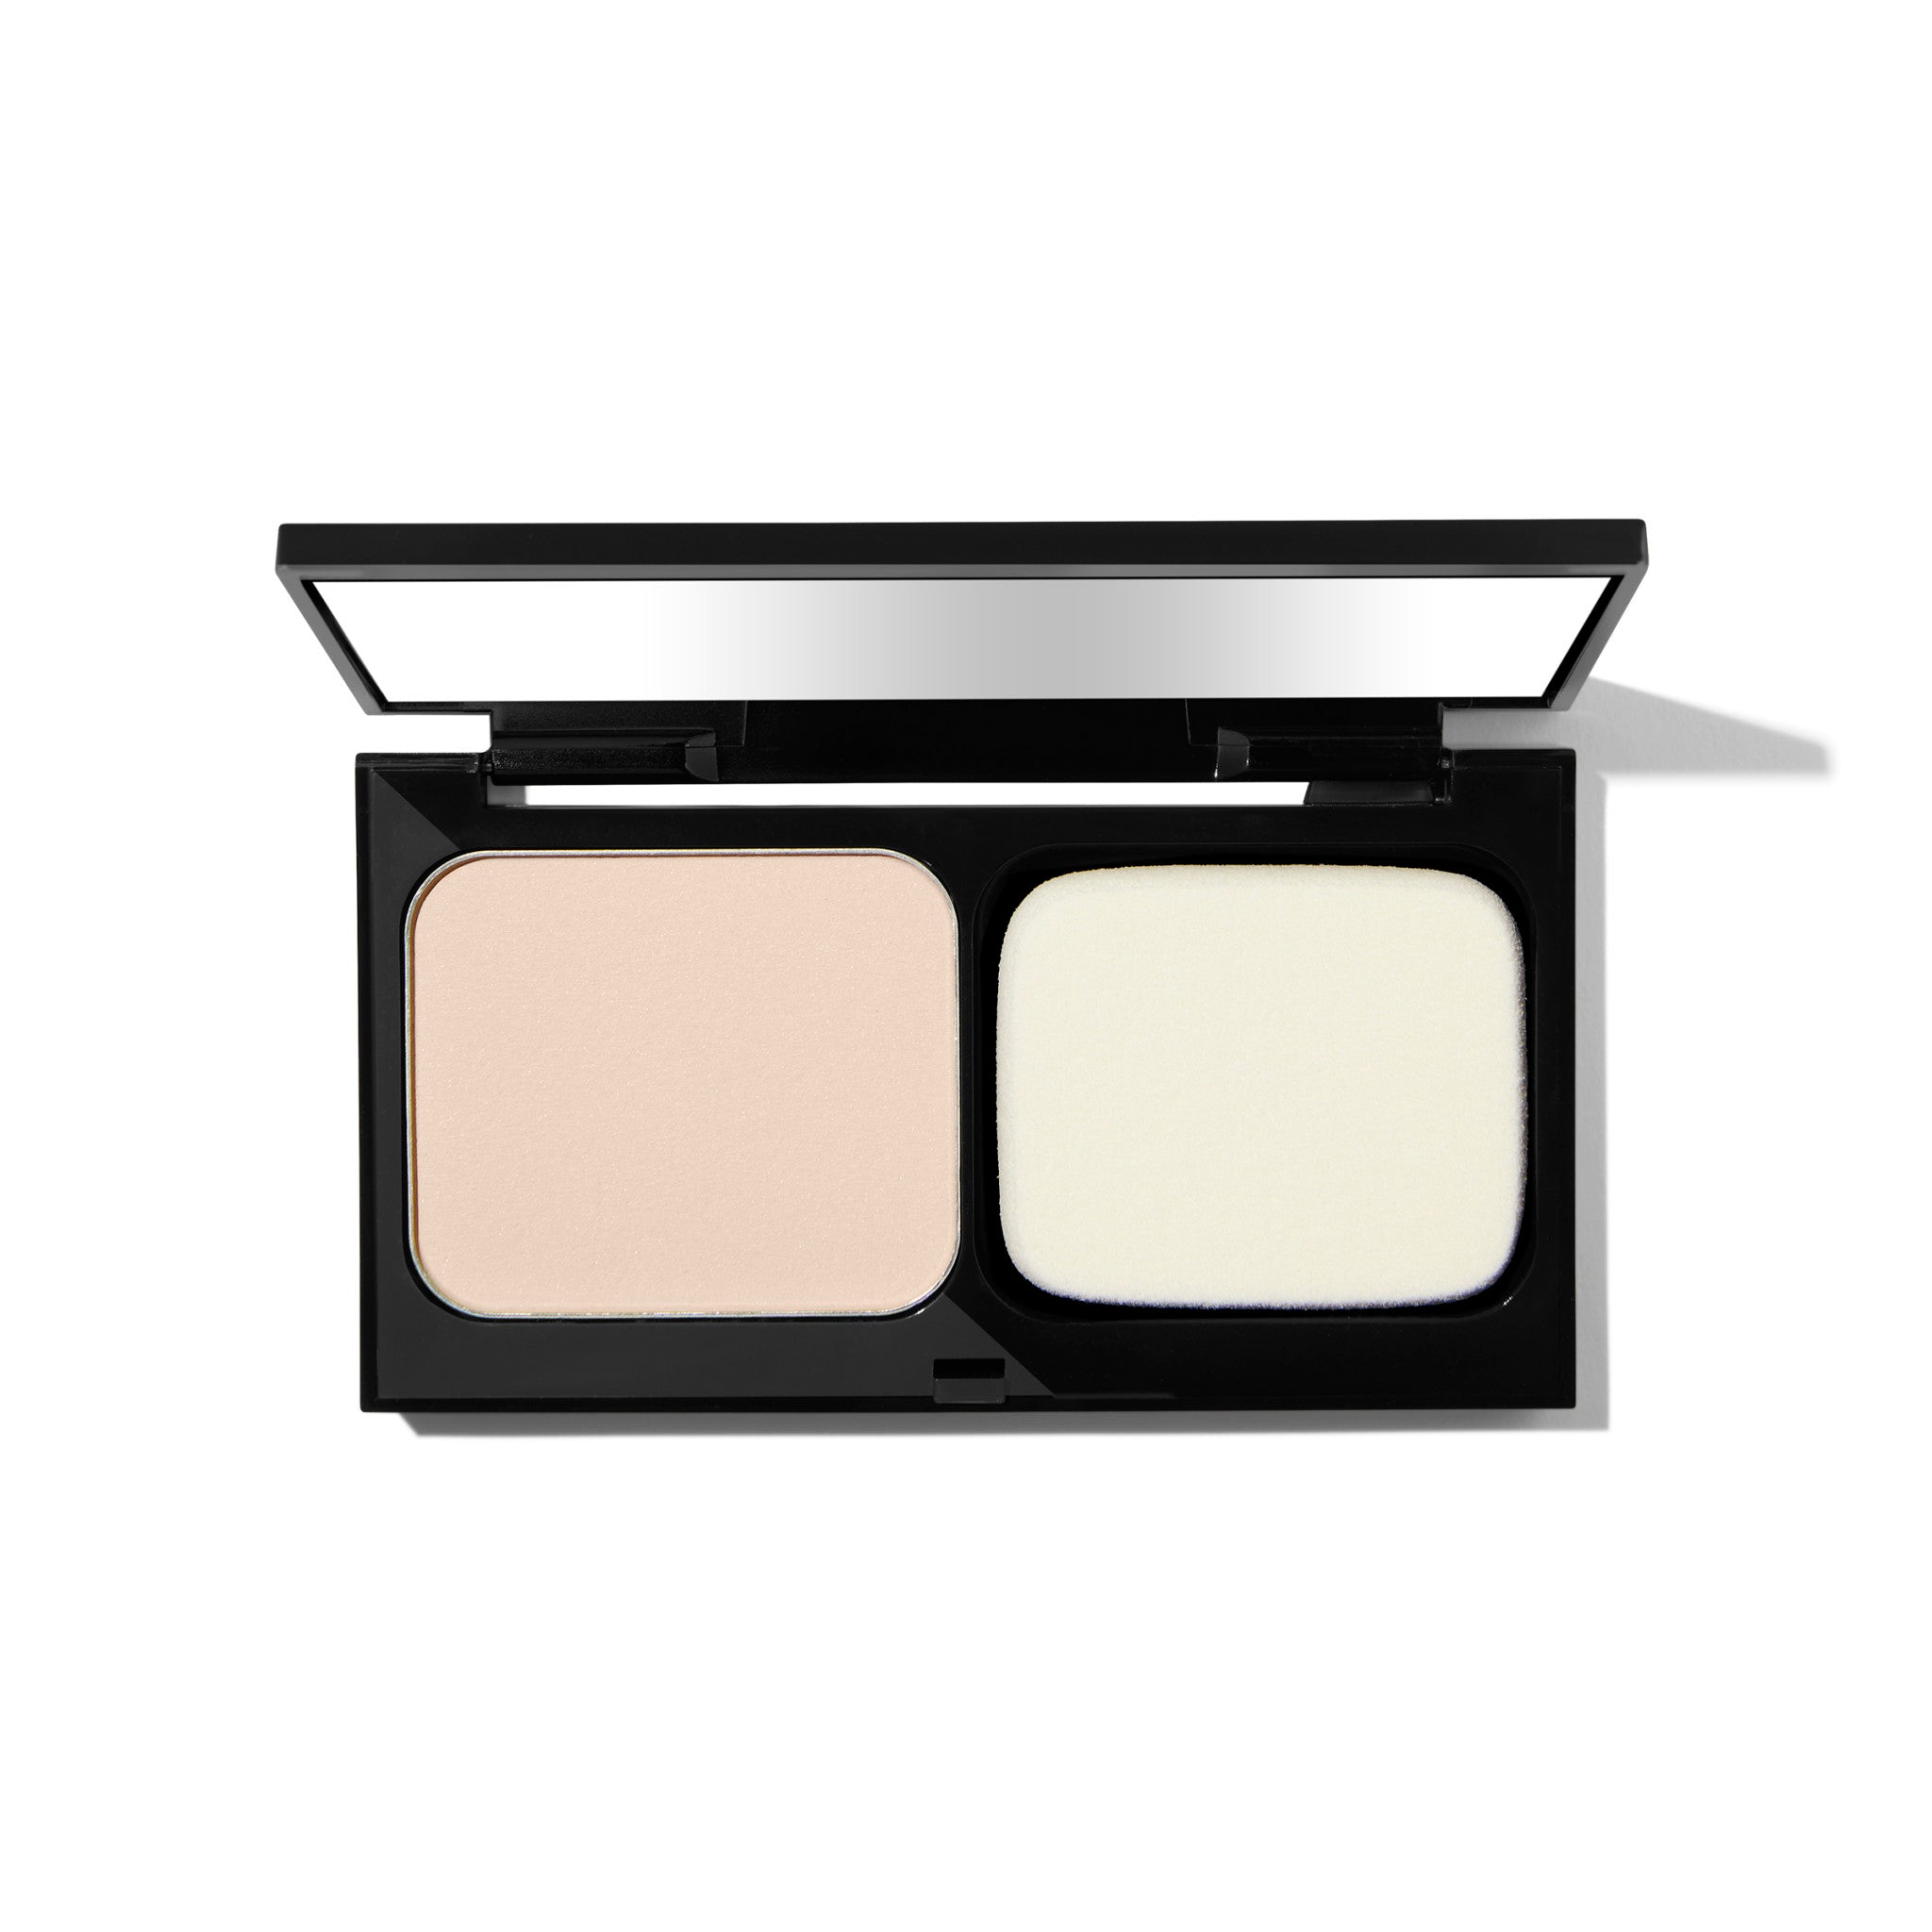 Bobbi Brown Skin Weightless Powder Foundation Color/Shade variant: Porcelain main image. This product is for light complexions